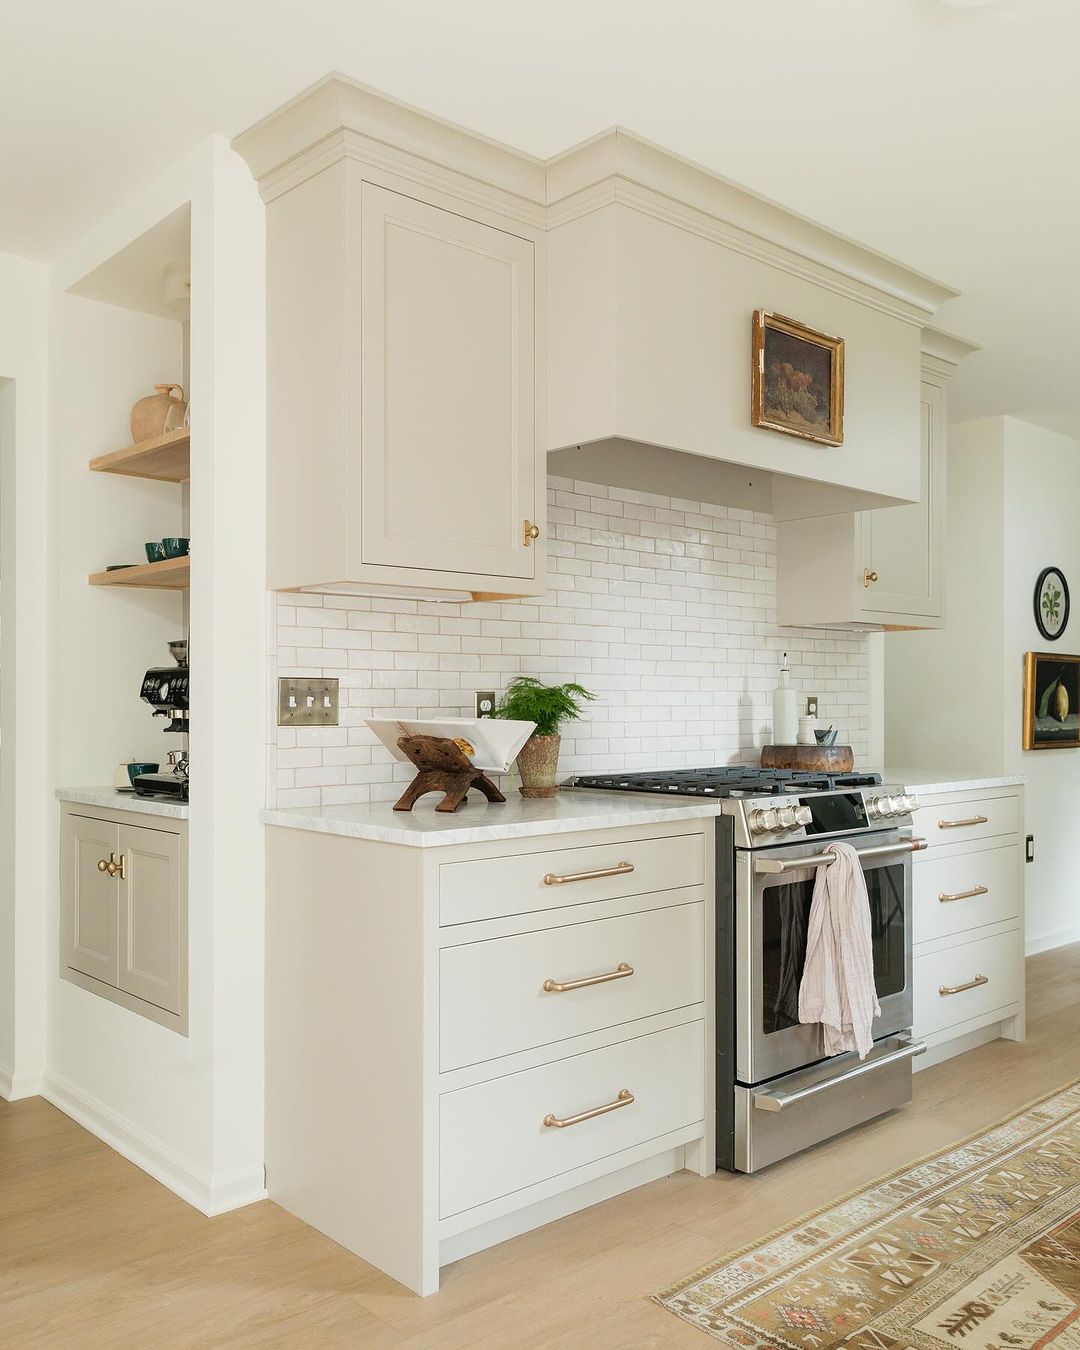 Classic Comfort: Warm Accents on Shaker Cabinetry